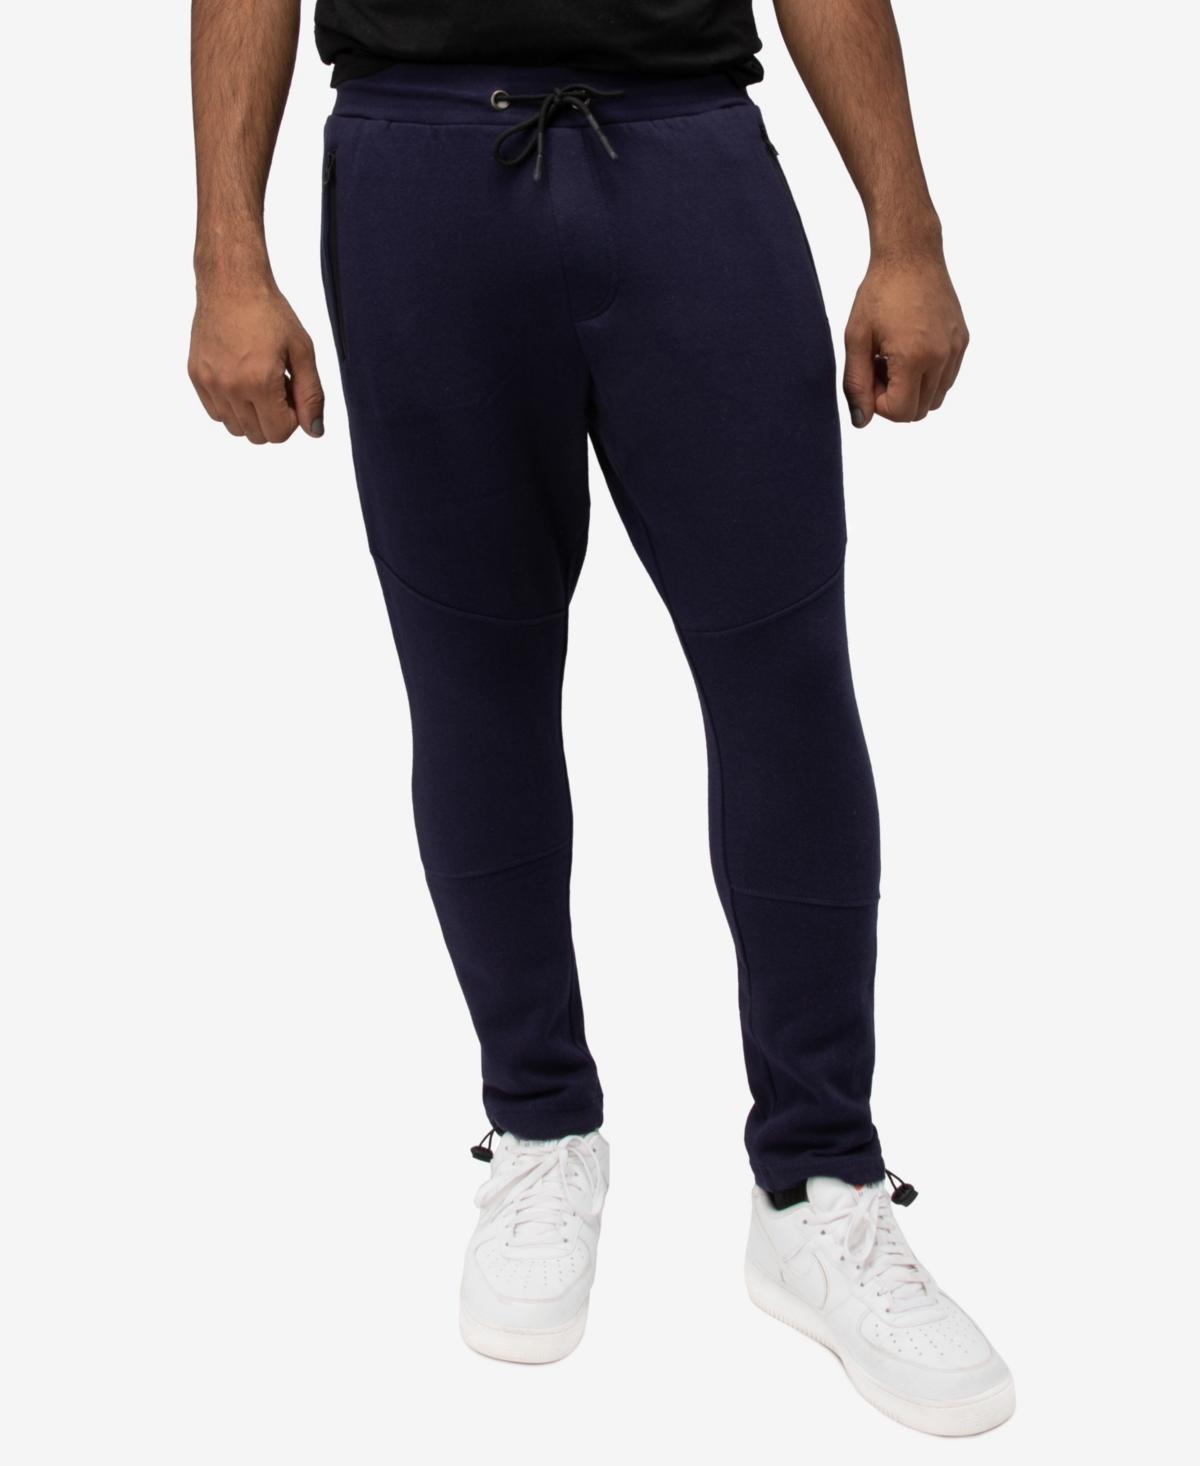 X-ray Men's Fleece Adjustable Ankle Drawstring Joggers Pants In Navy